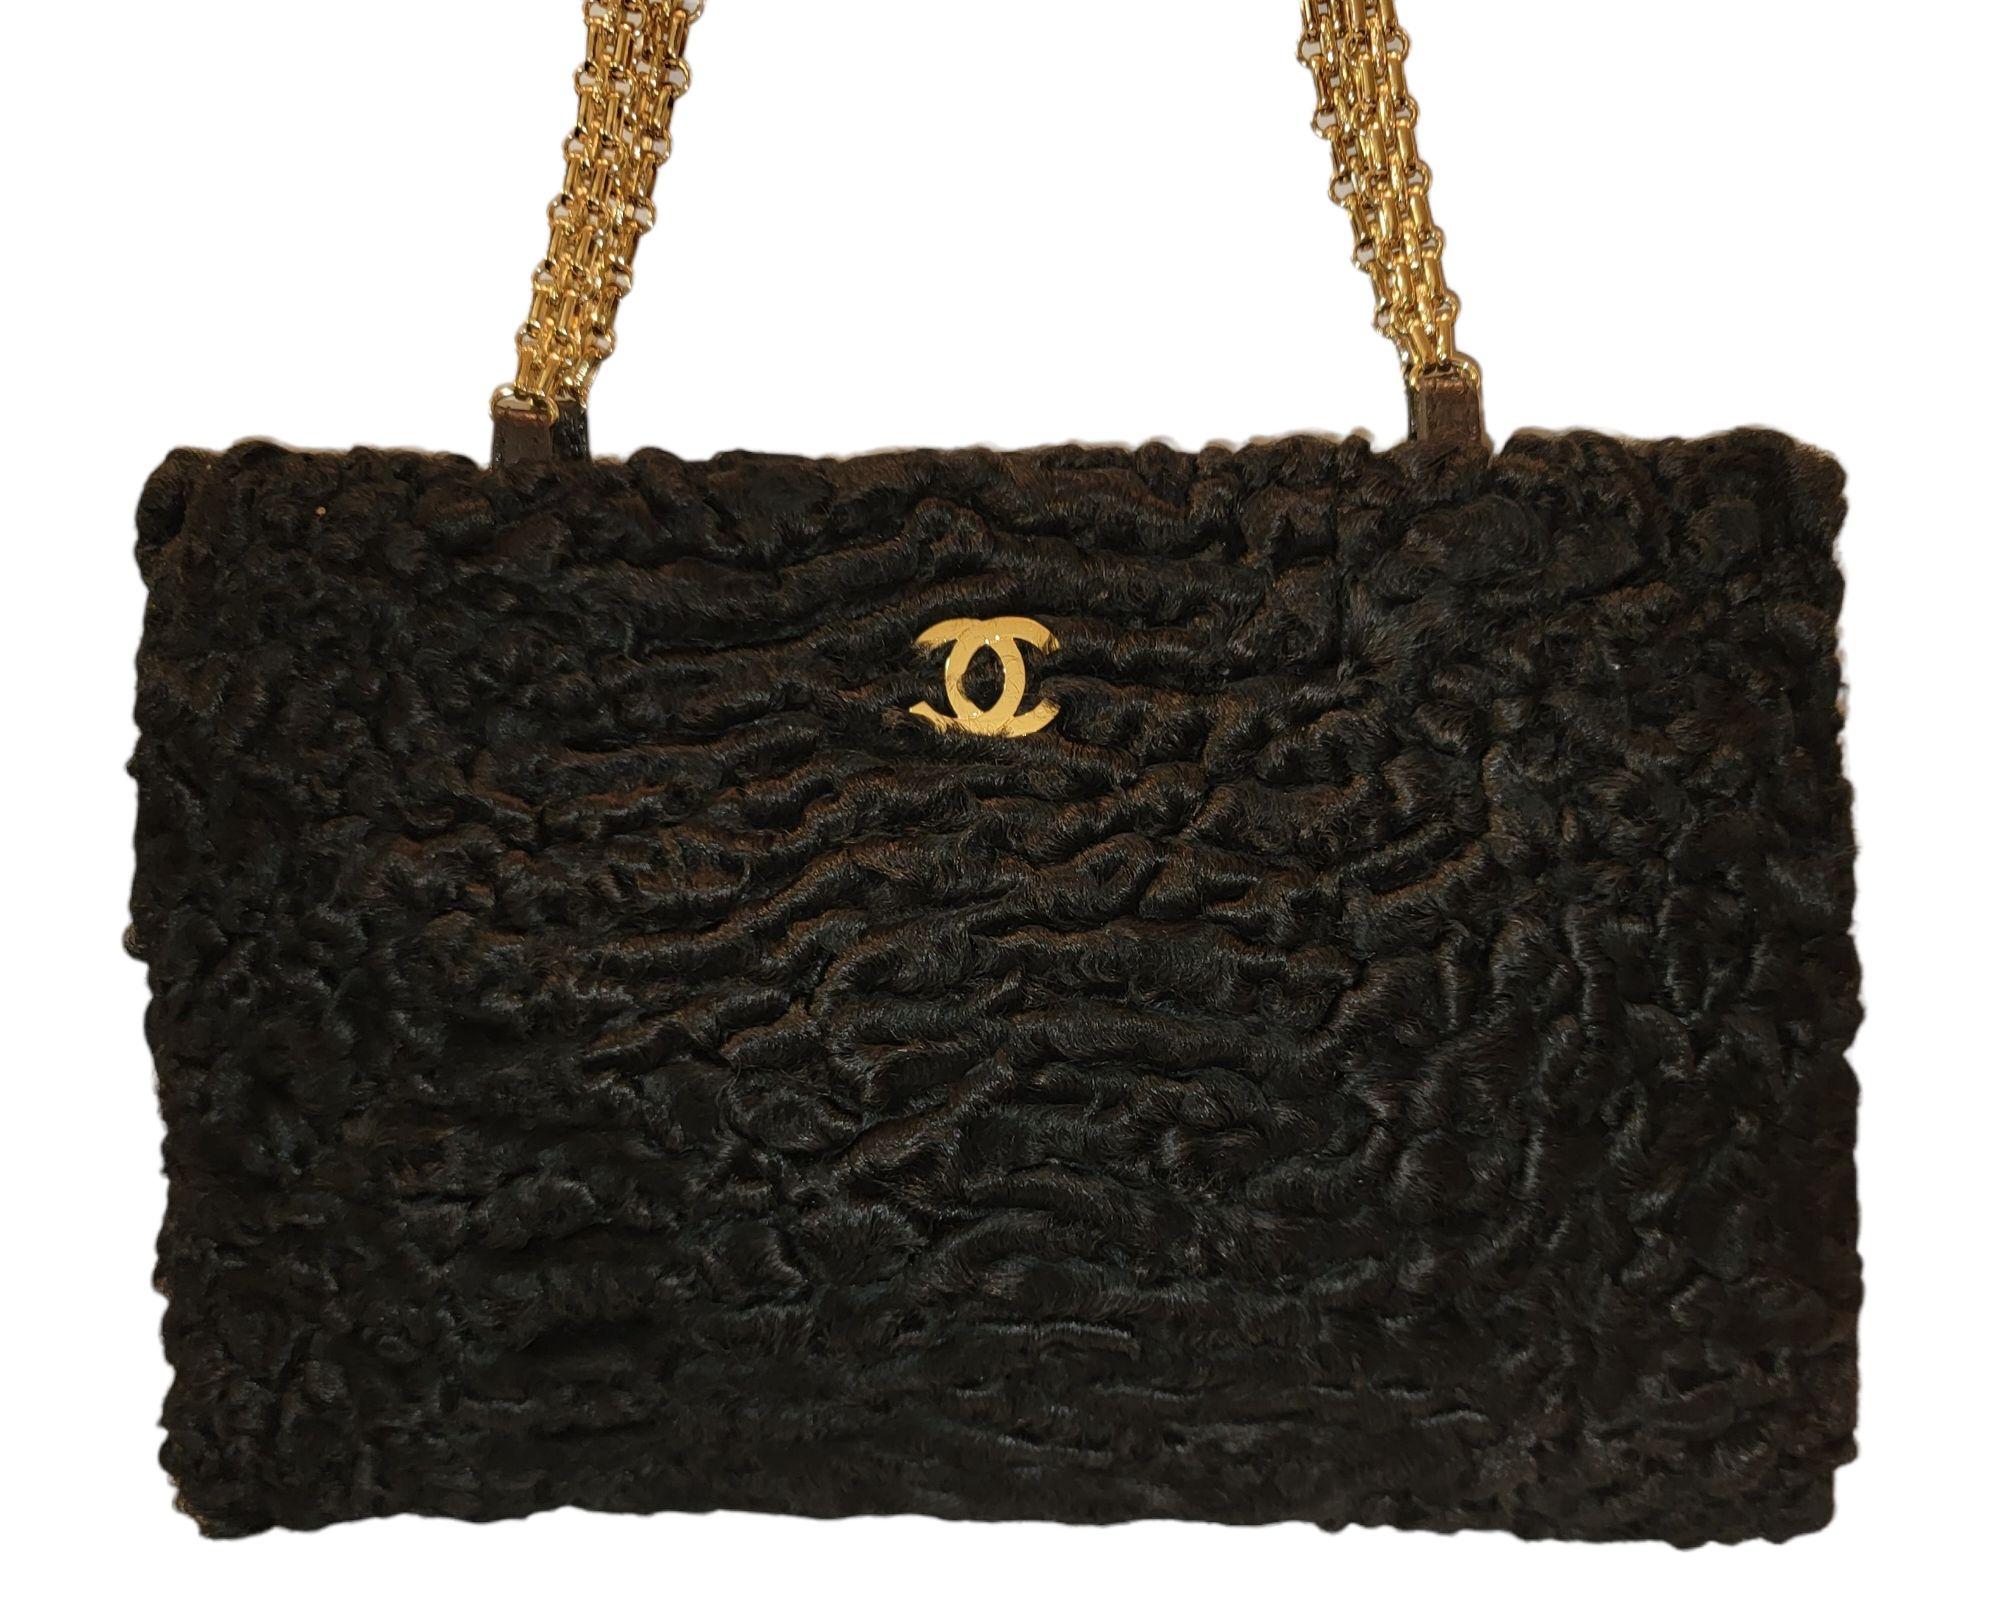 Chanel Rare Exotic Persian Baby Lamb Skin Hand Bag Clutch Black In Excellent Condition For Sale In Pasadena, CA